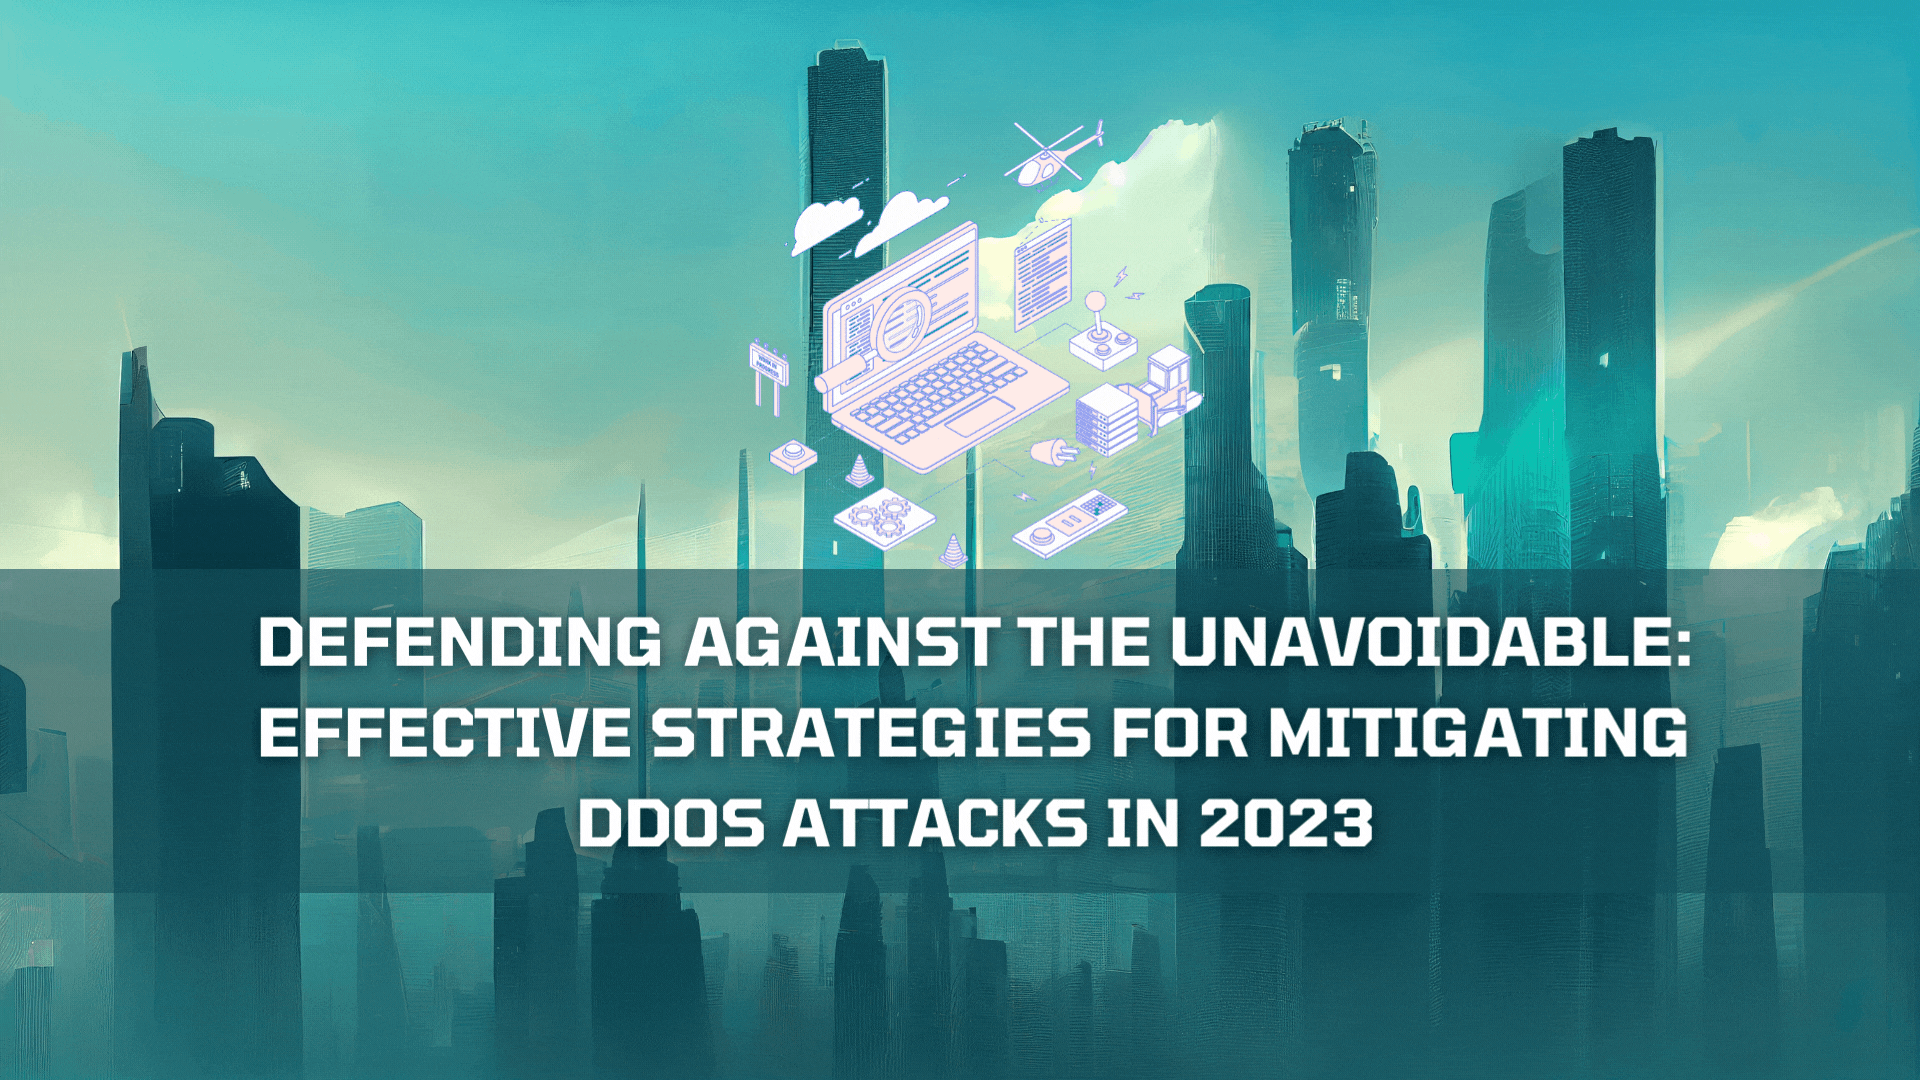 Defending Against The Unavoidable Effective Strategies For Mitigating DDoS Attacks In 2023 (1)